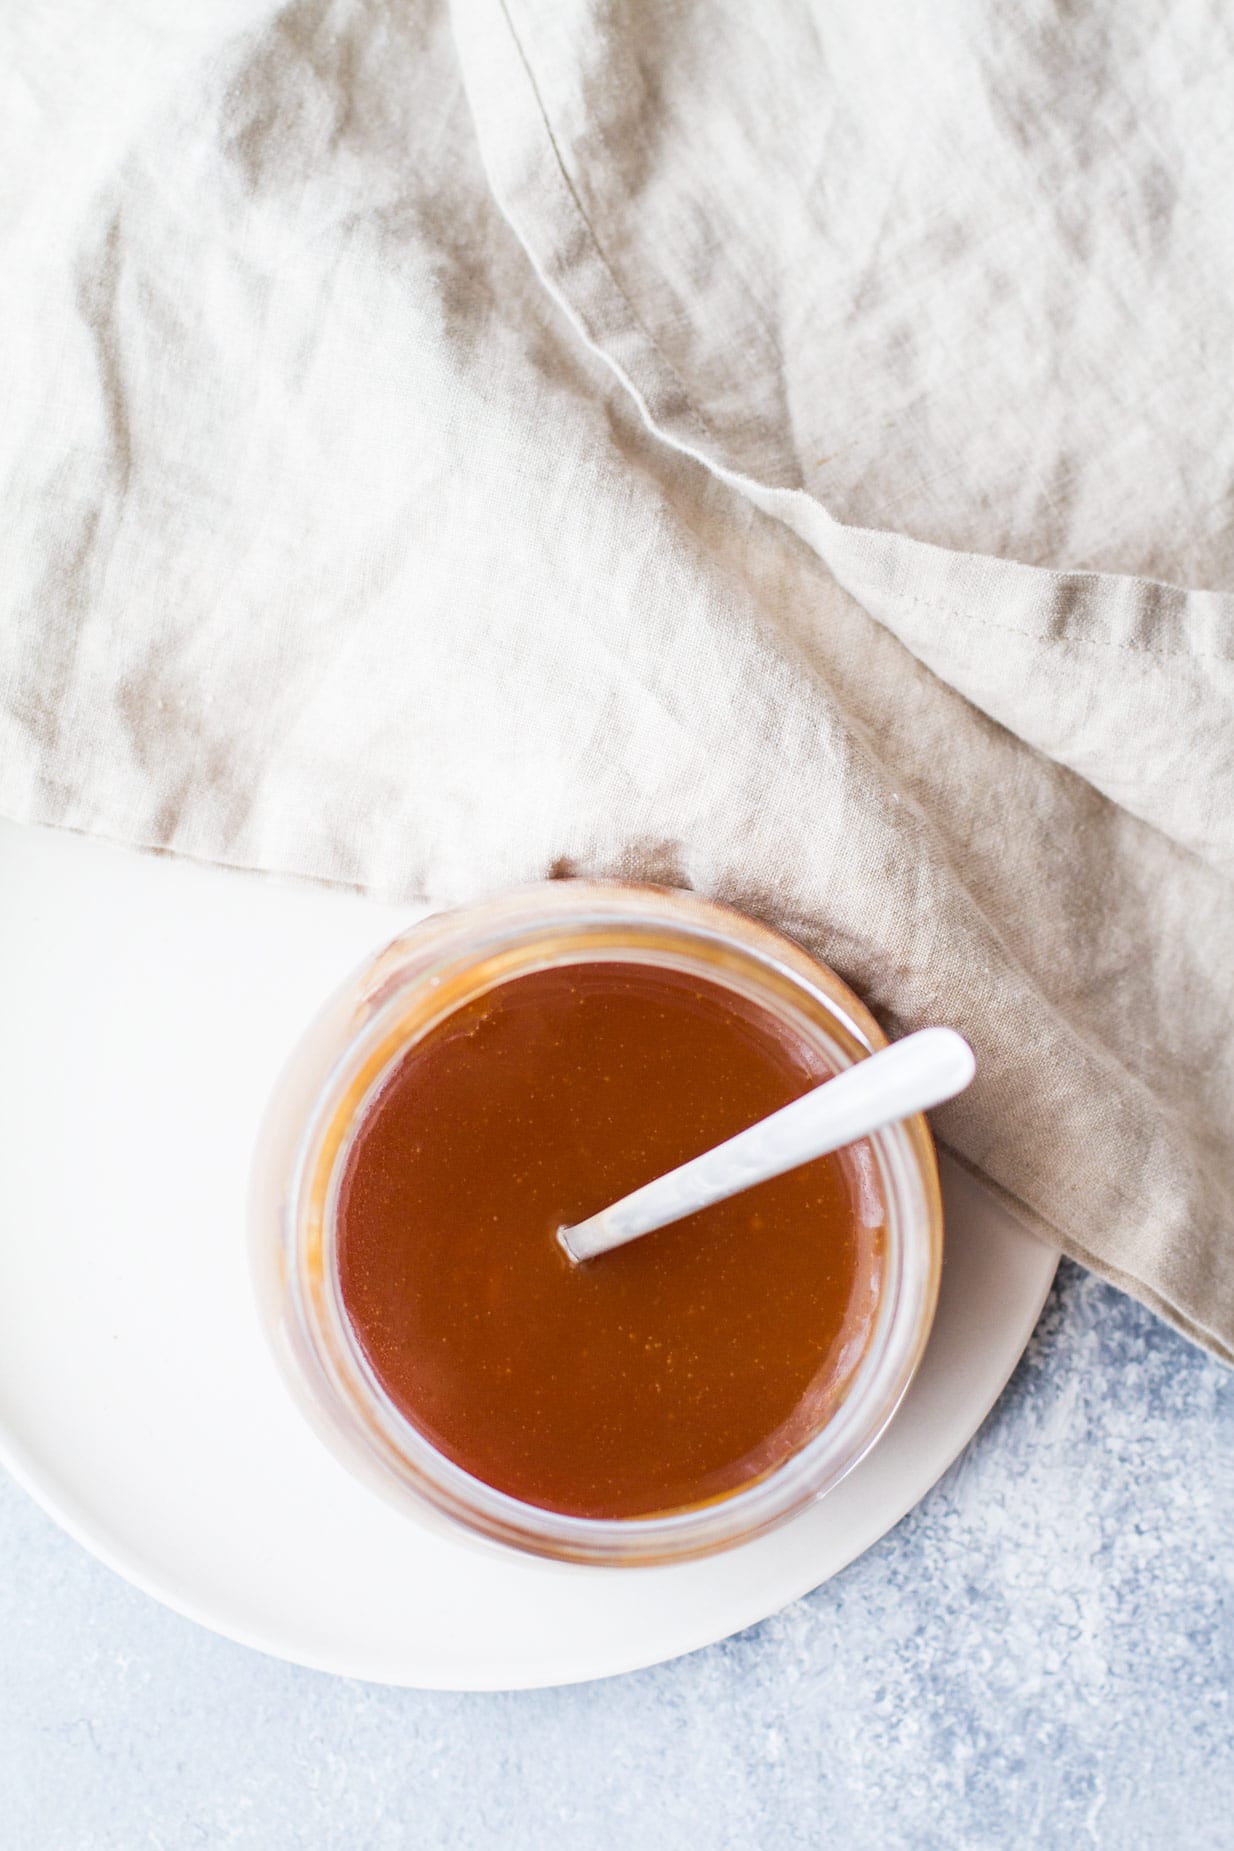 Delicious 10 Minute Salted Caramel Sauce